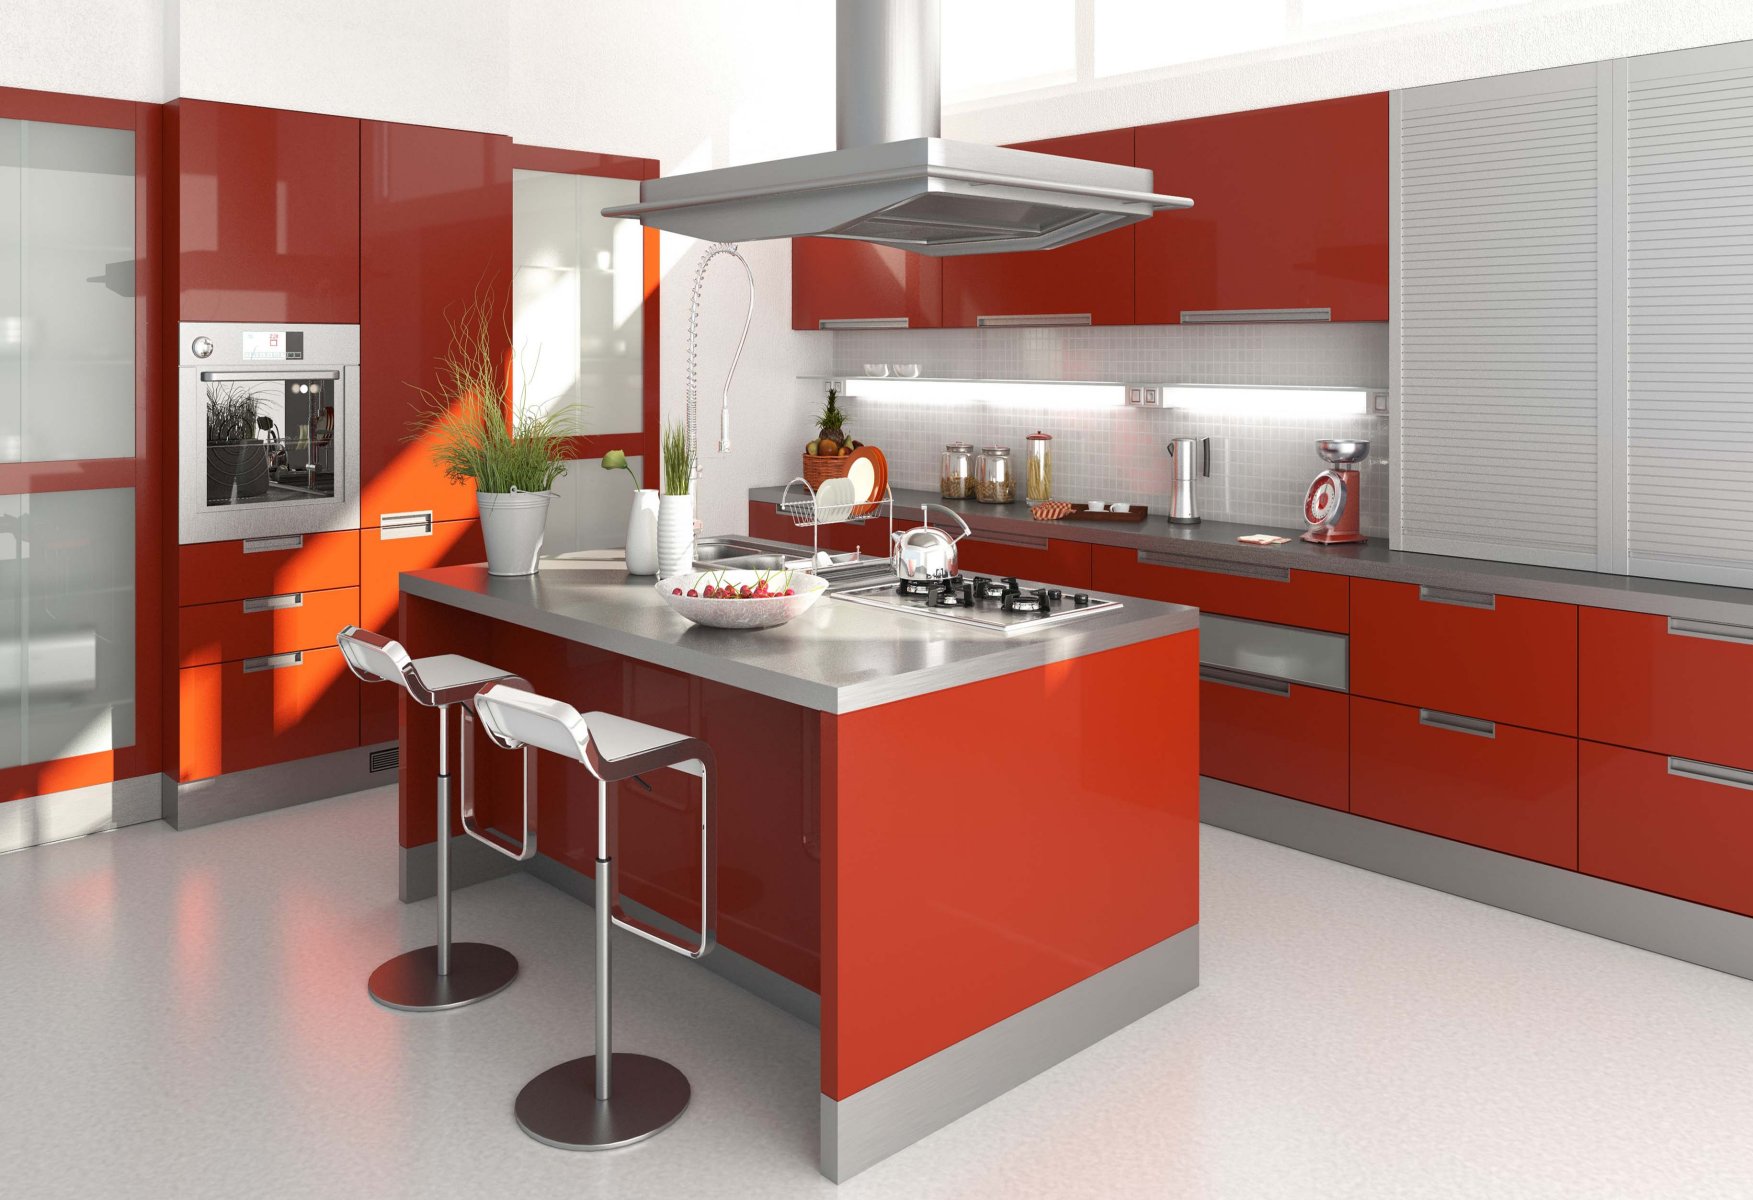 Red kitchen ideas – burgundy, scarlet, rust and terracotta cabinetry to